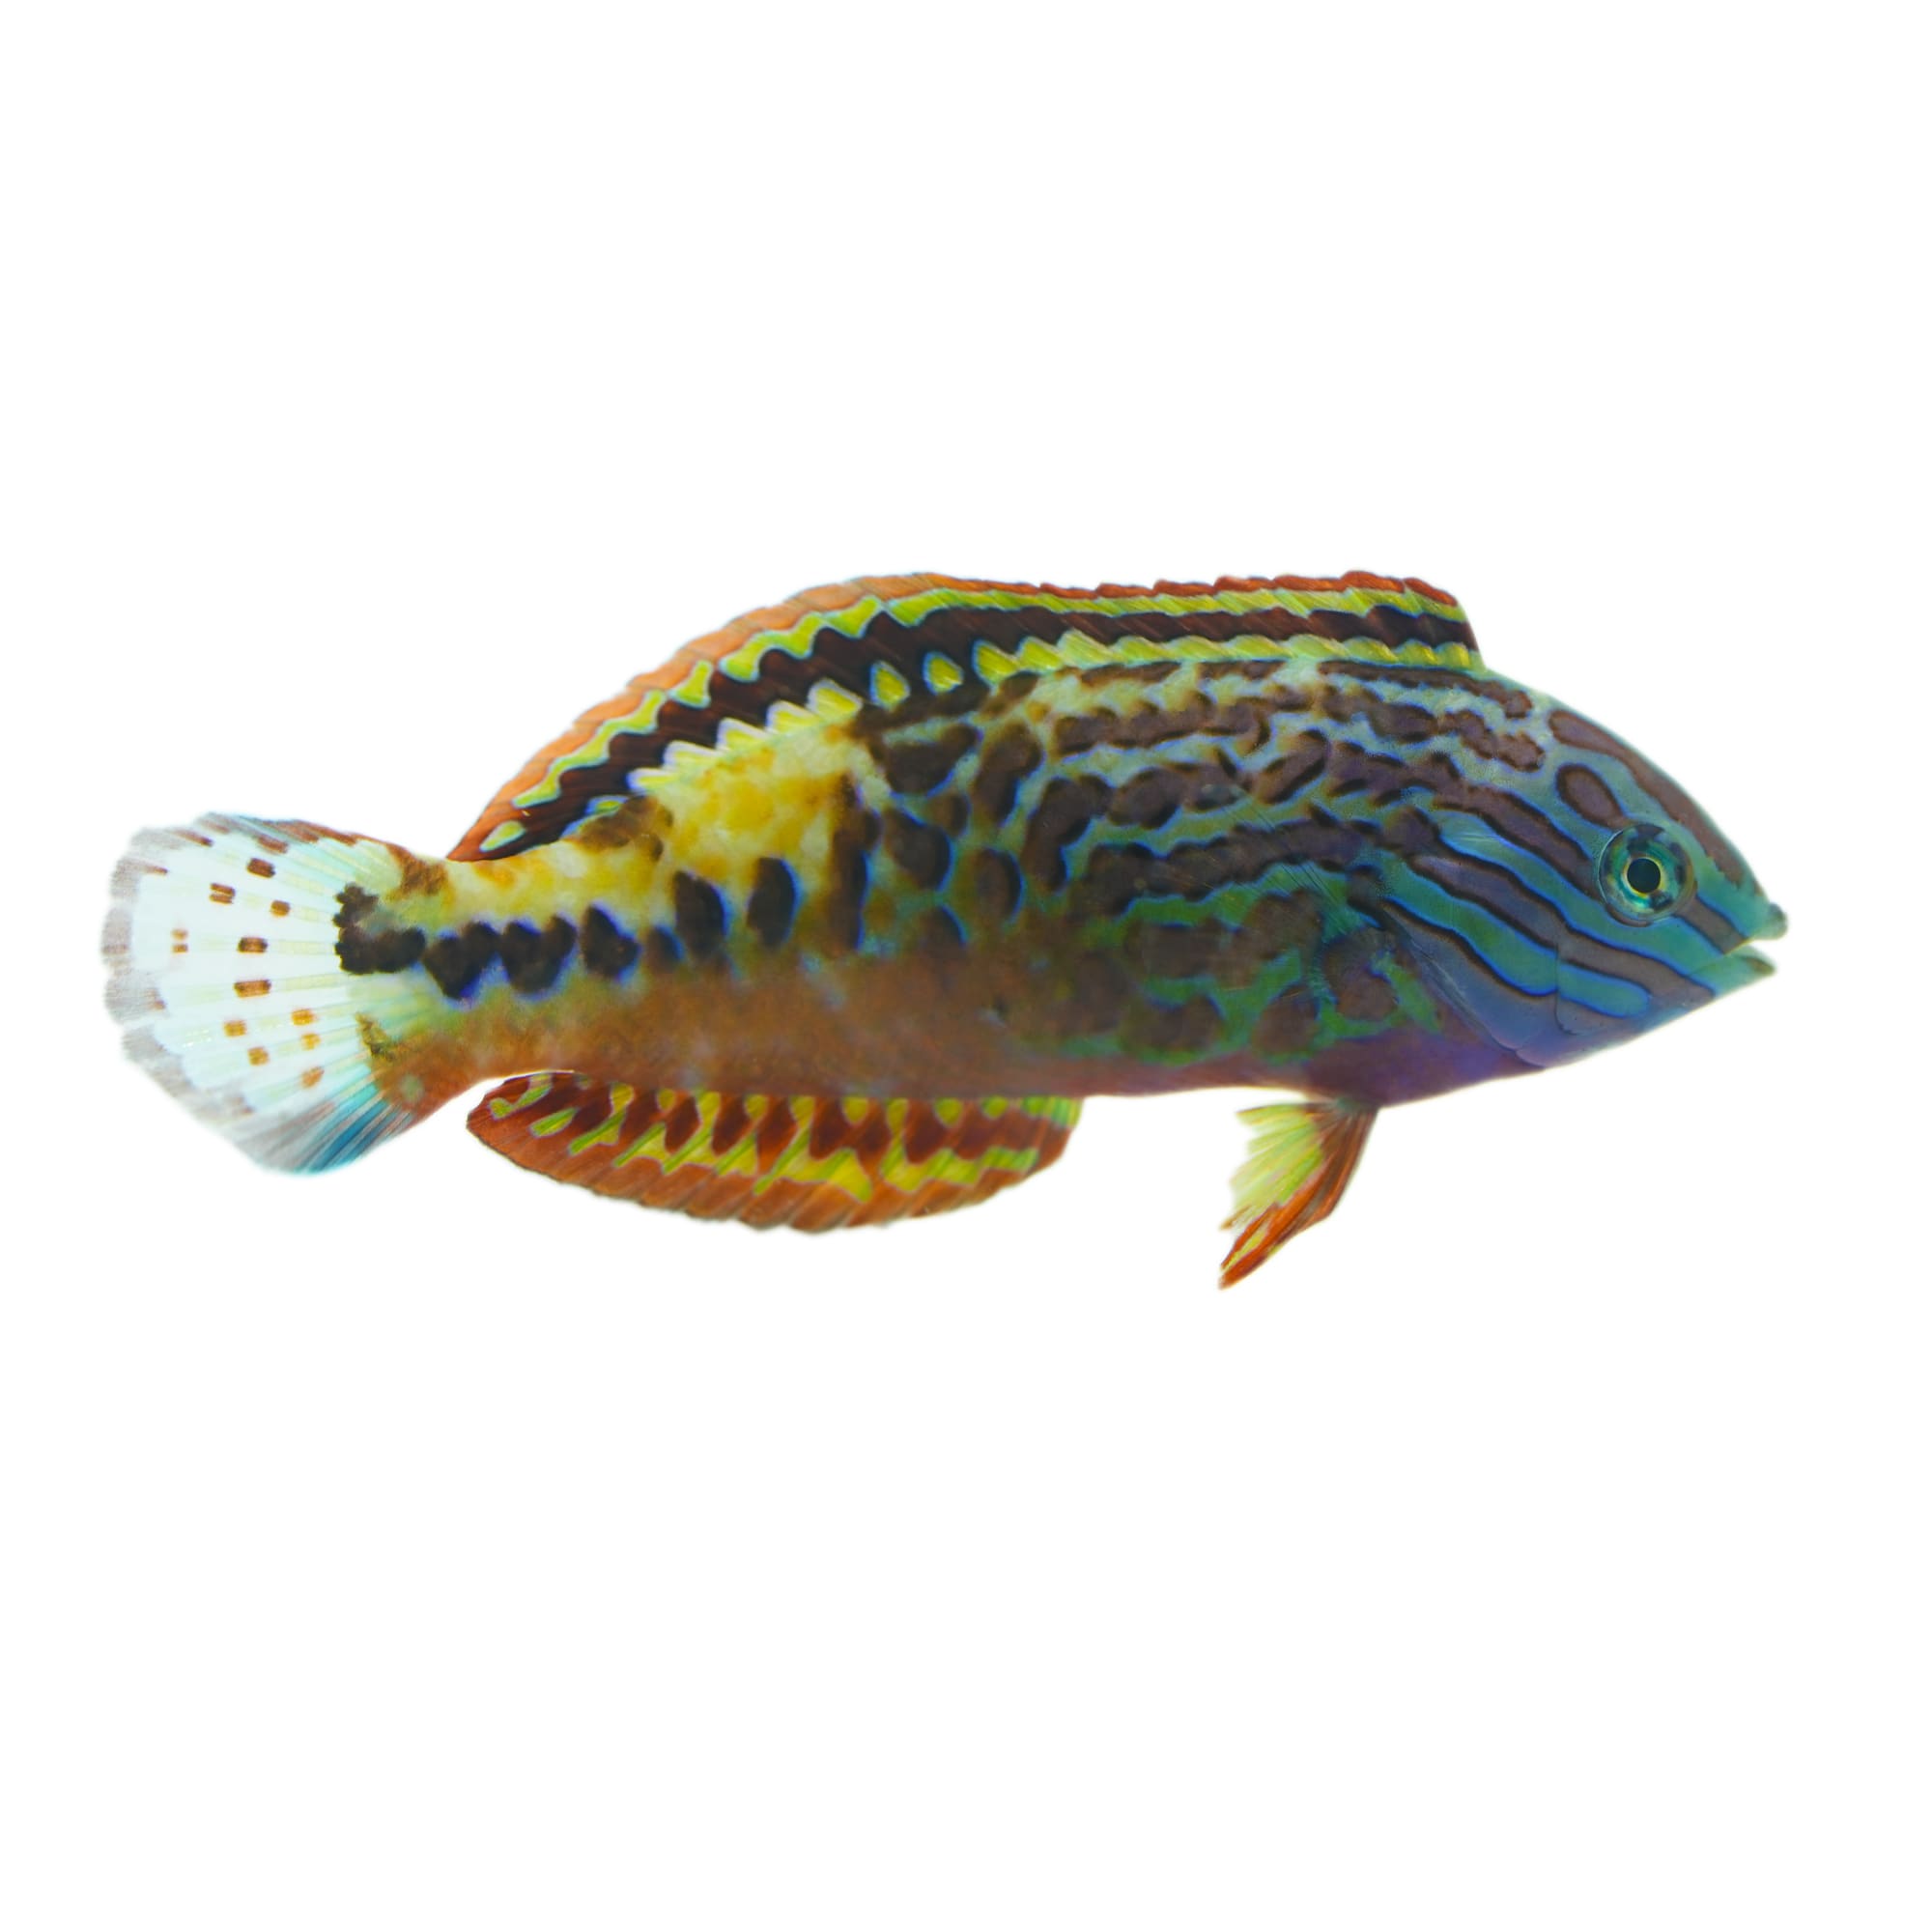 Super Star Of The Reef: The Blue Star Leopard Wrasse